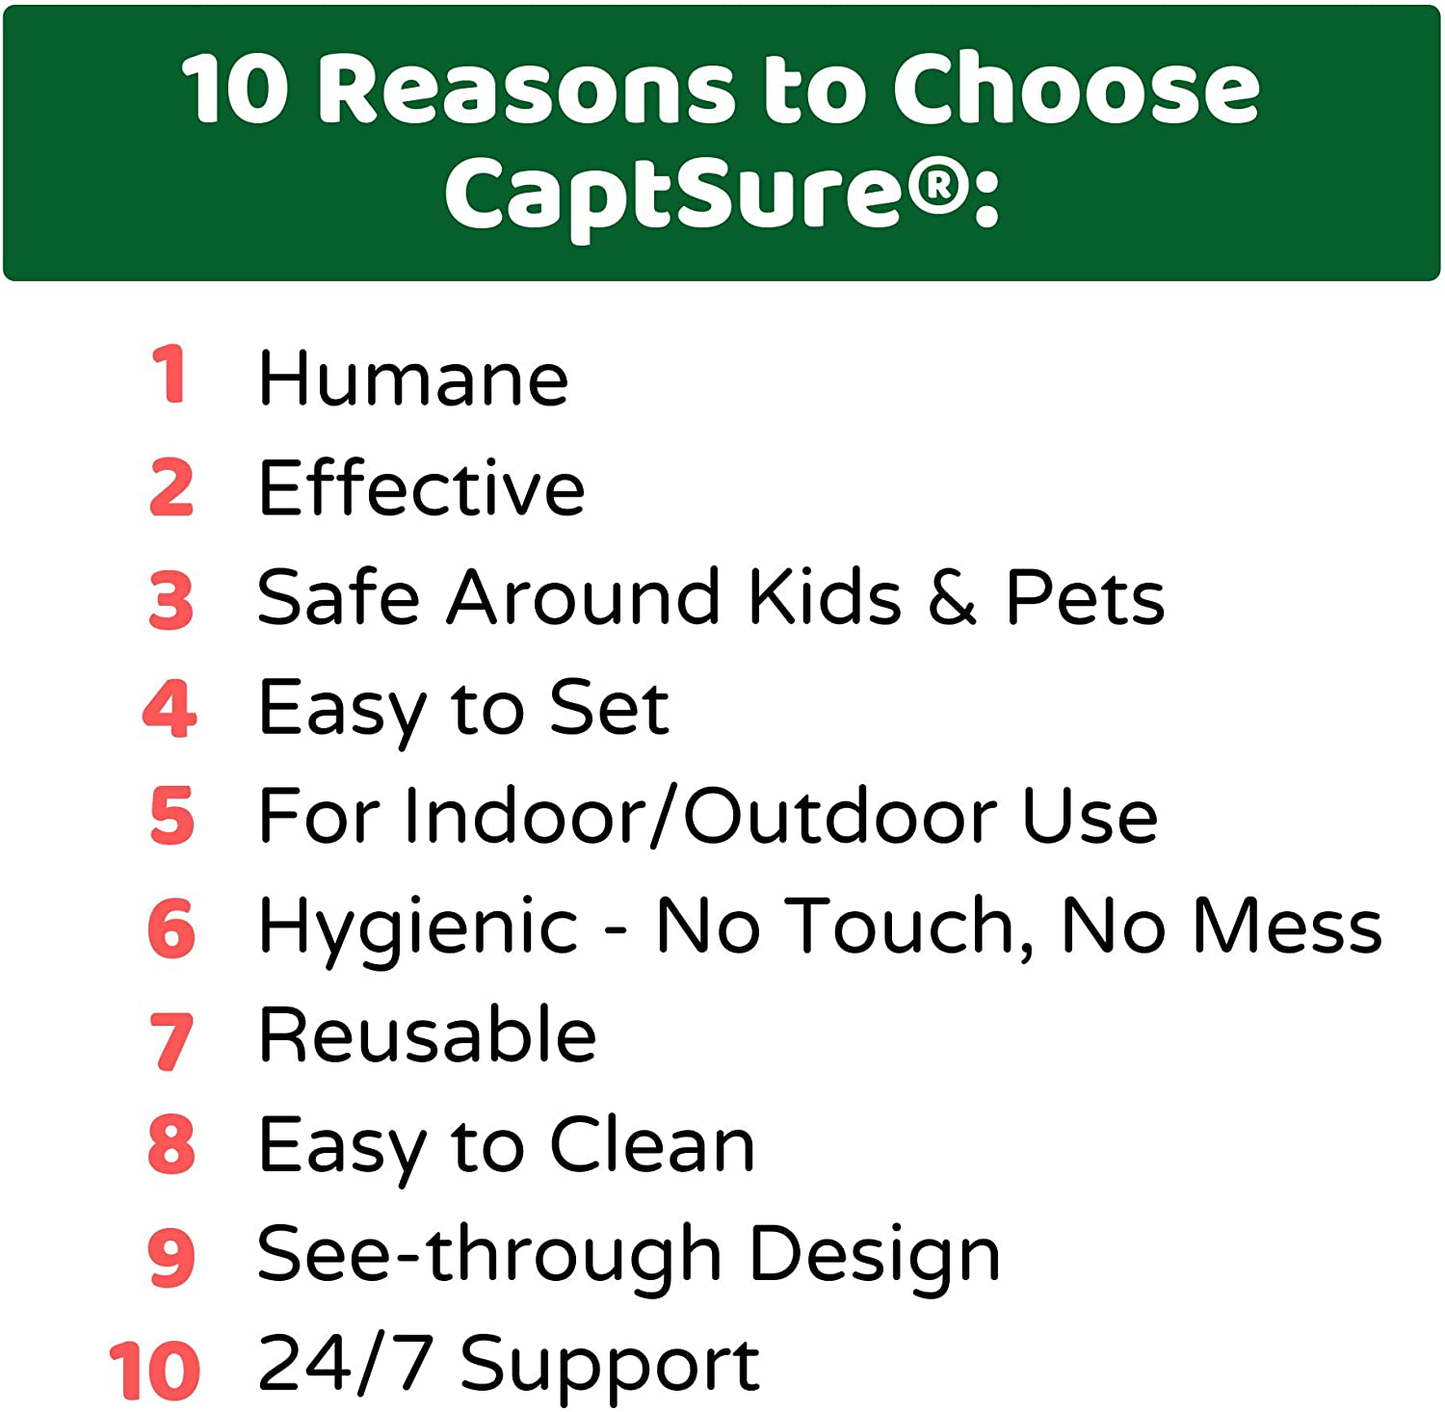 Captsure Original Humane Mouse Traps, Easy to Set, Kids/Pets Safe, Reusable for Indoor/Outdoor Use, for Small Rodent/Voles/Hamsters/Moles Catcher That Works. 2 Pack (Large)